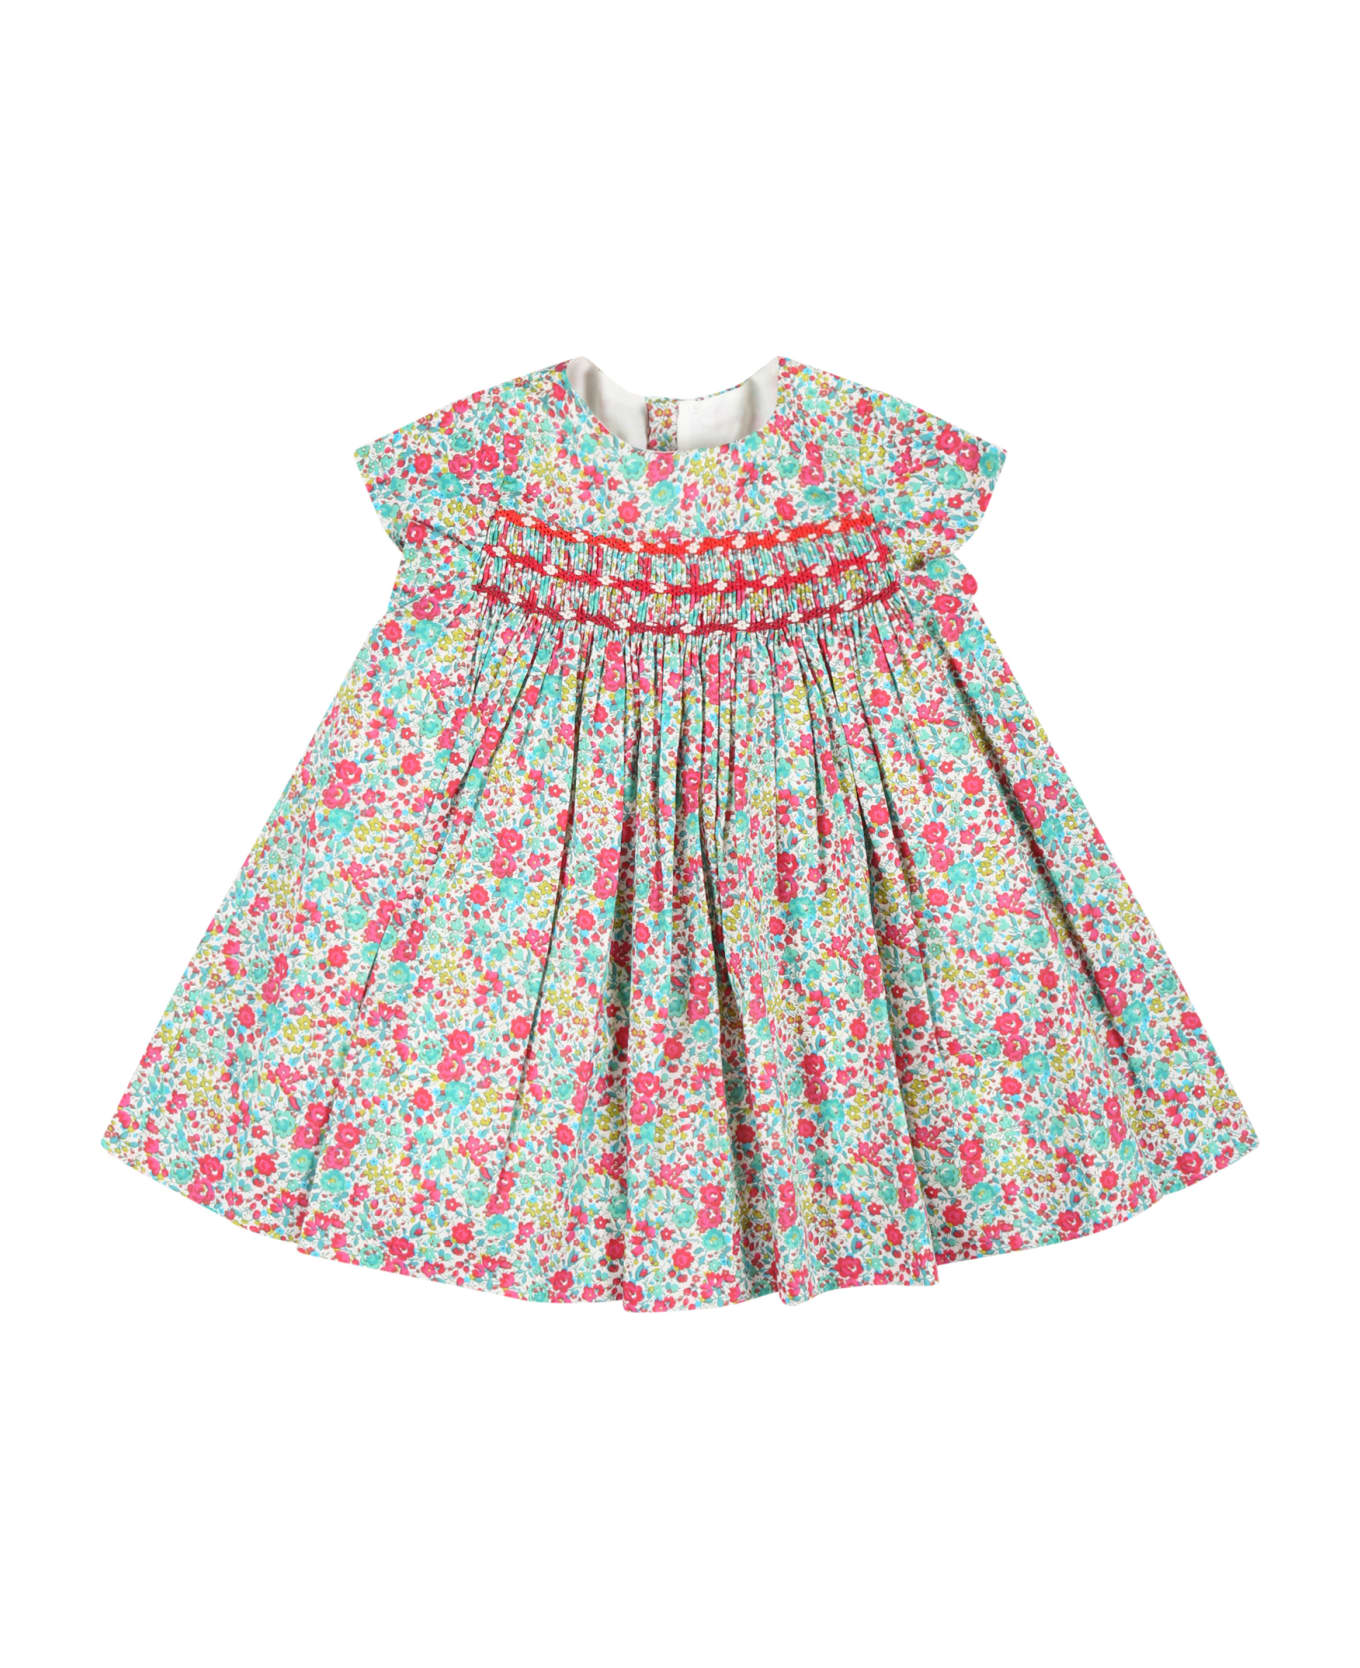 Bonpoint Multicolor Dress For Baby Girl With Liberty Print - Multicolor ウェア